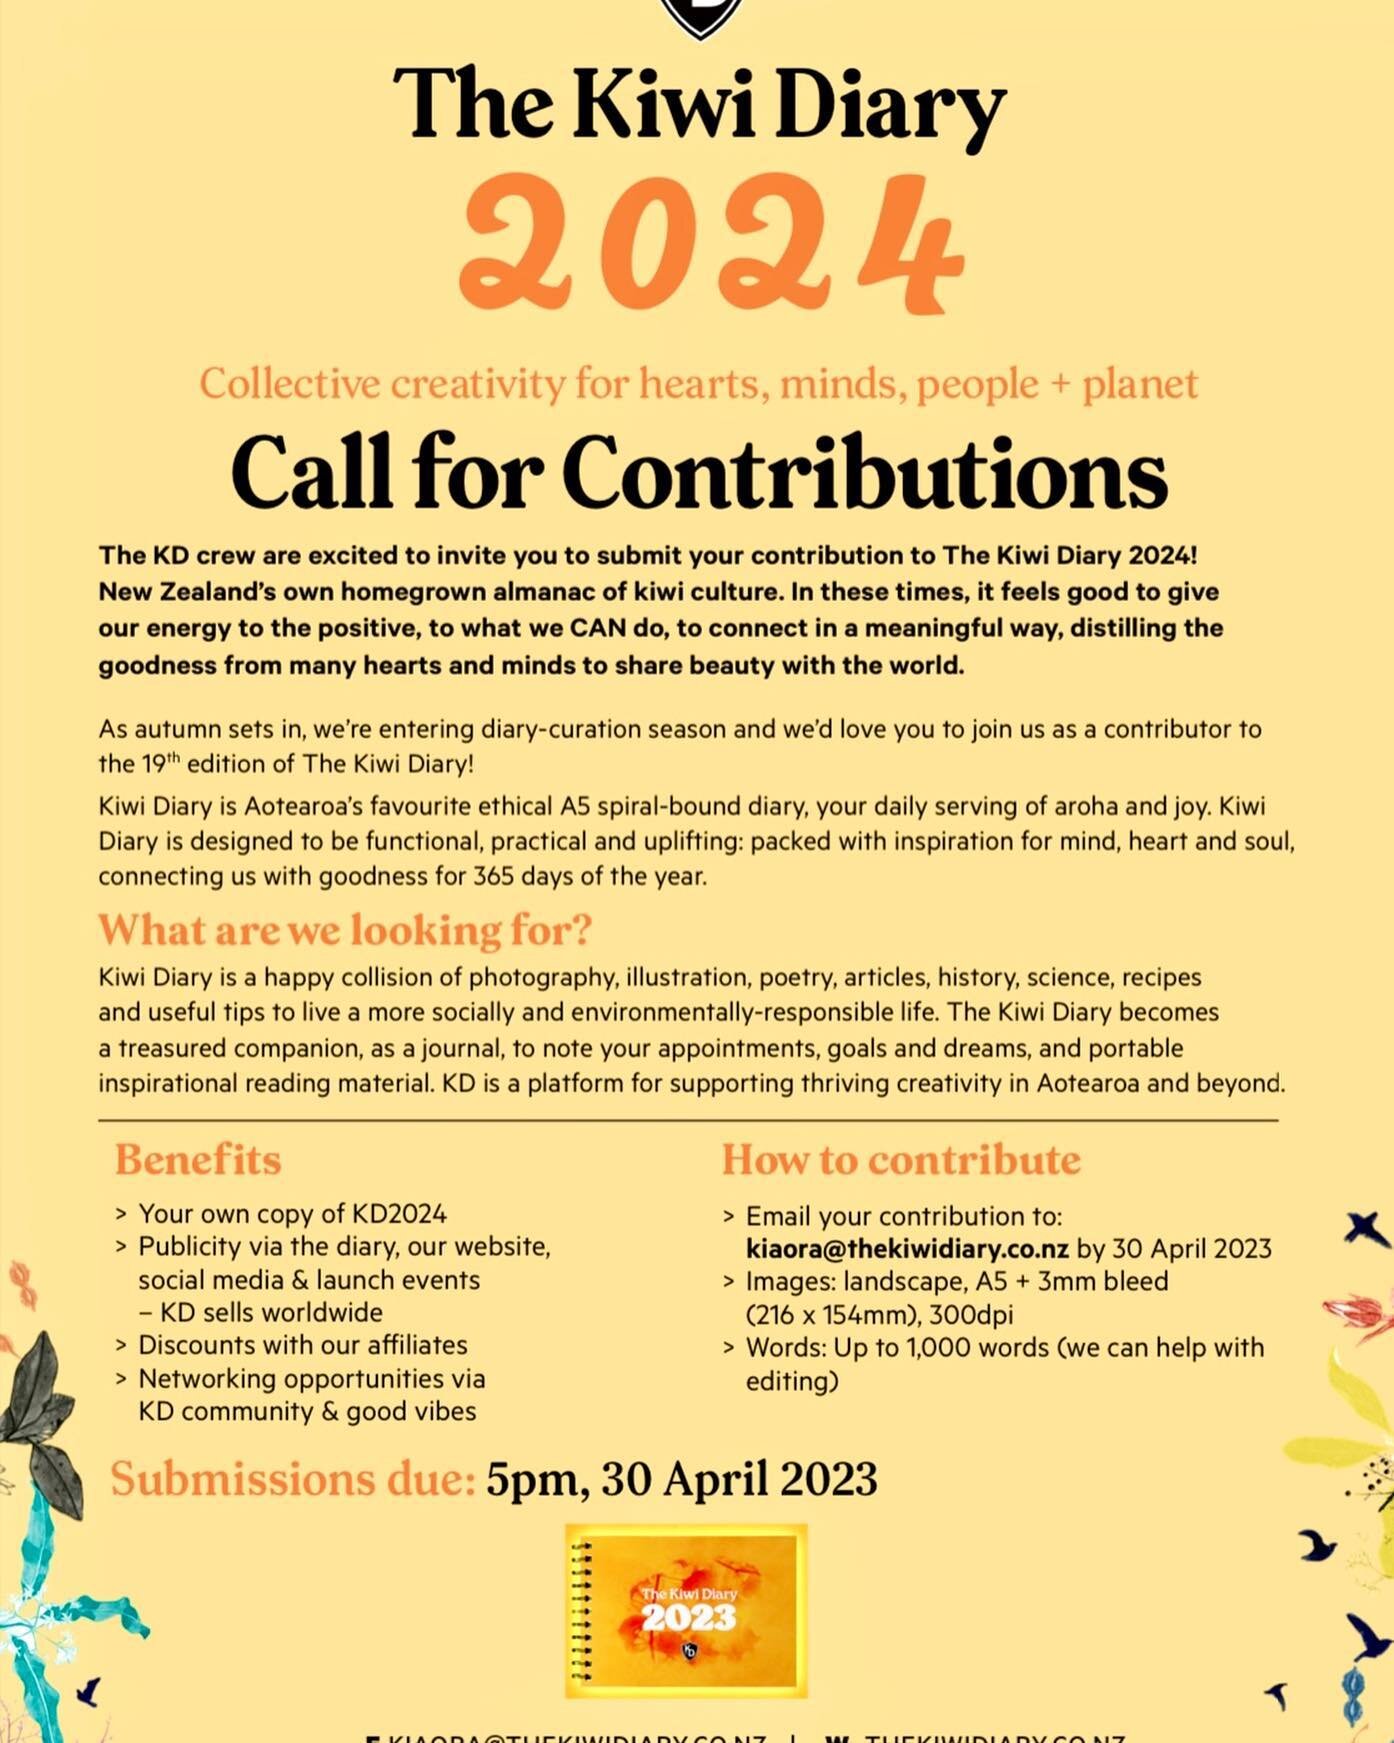 It&rsquo;s time!!!
Collective creativity is good for heart mind society and planet - kiwi diary contributors and owners have been telling us this since 2004 peops&hellip;.. 🤍✨
let&rsquo;s make goodness happen!
Call for contributions for the kiwi dia